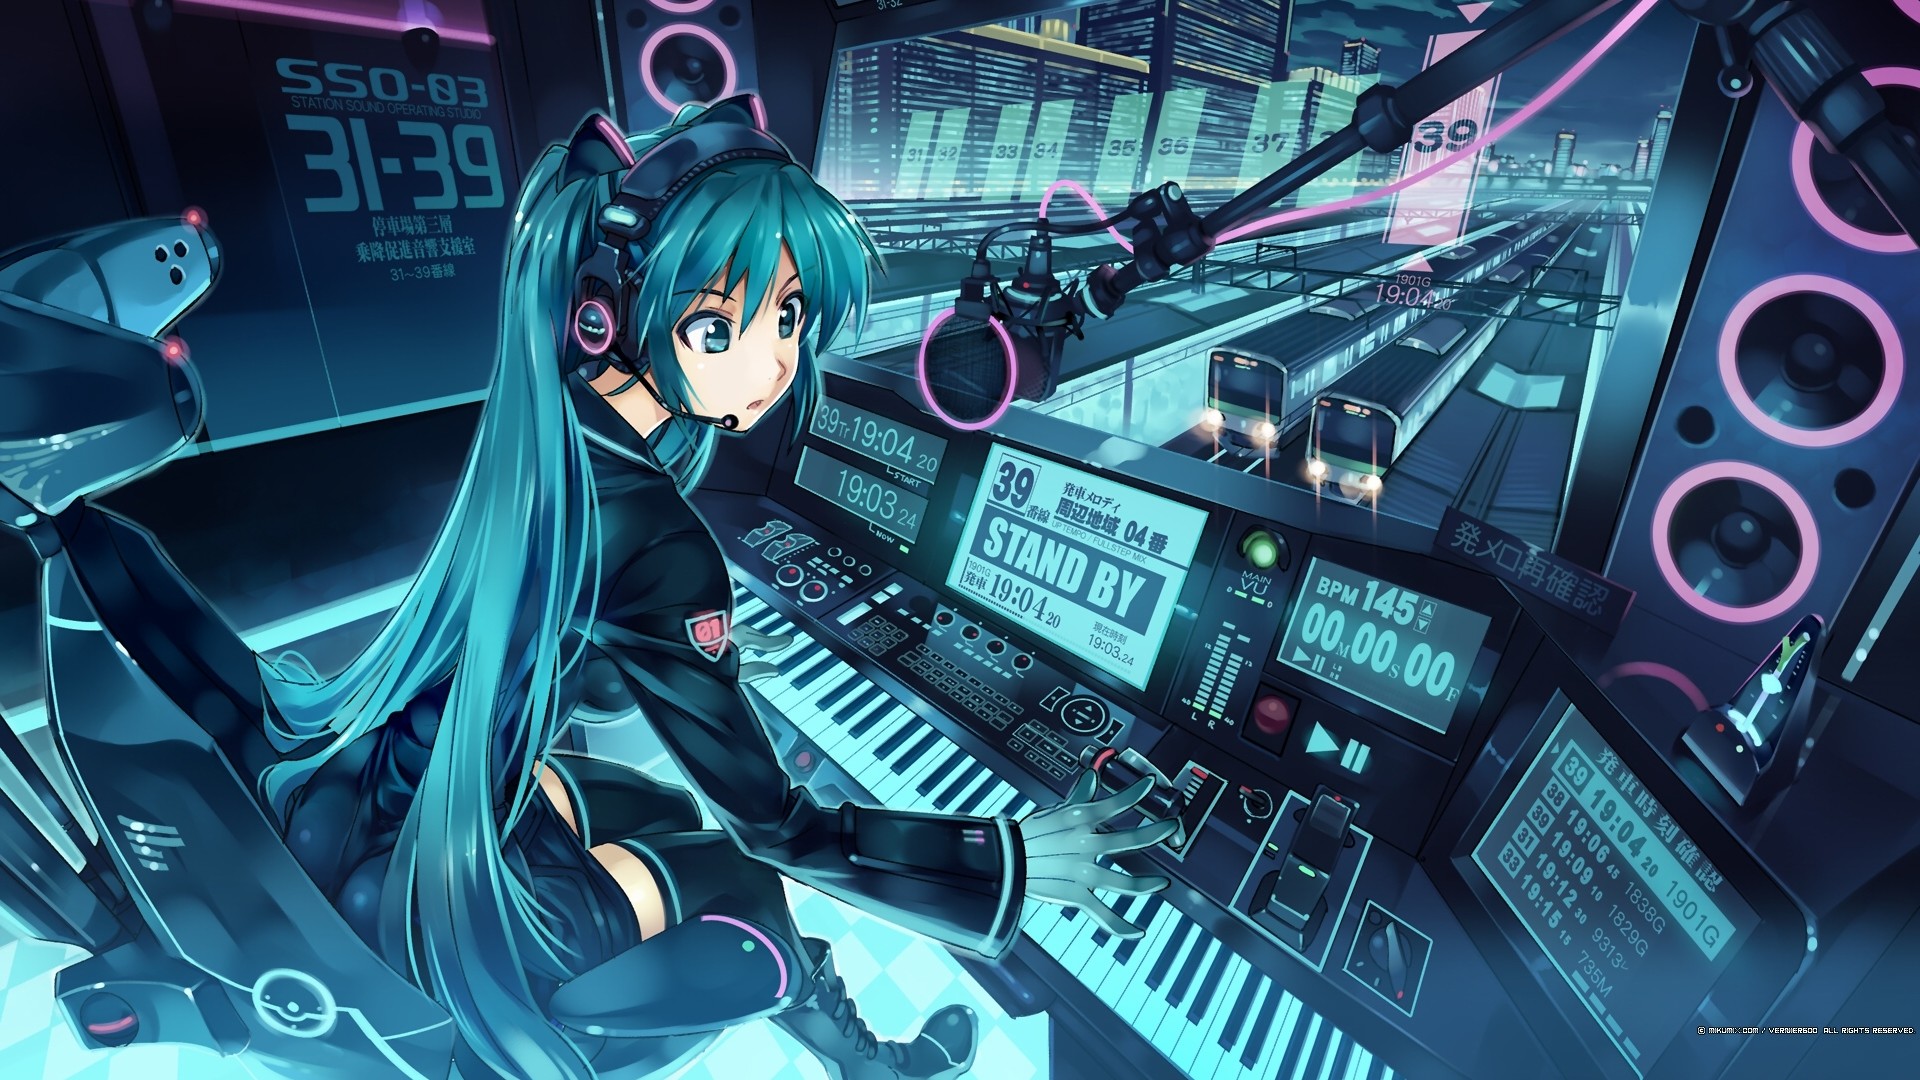 1920x1080 HD Wallpaper and background photos of Miku Hatsune Wallpaper for fans of Hatsune  Miku images.